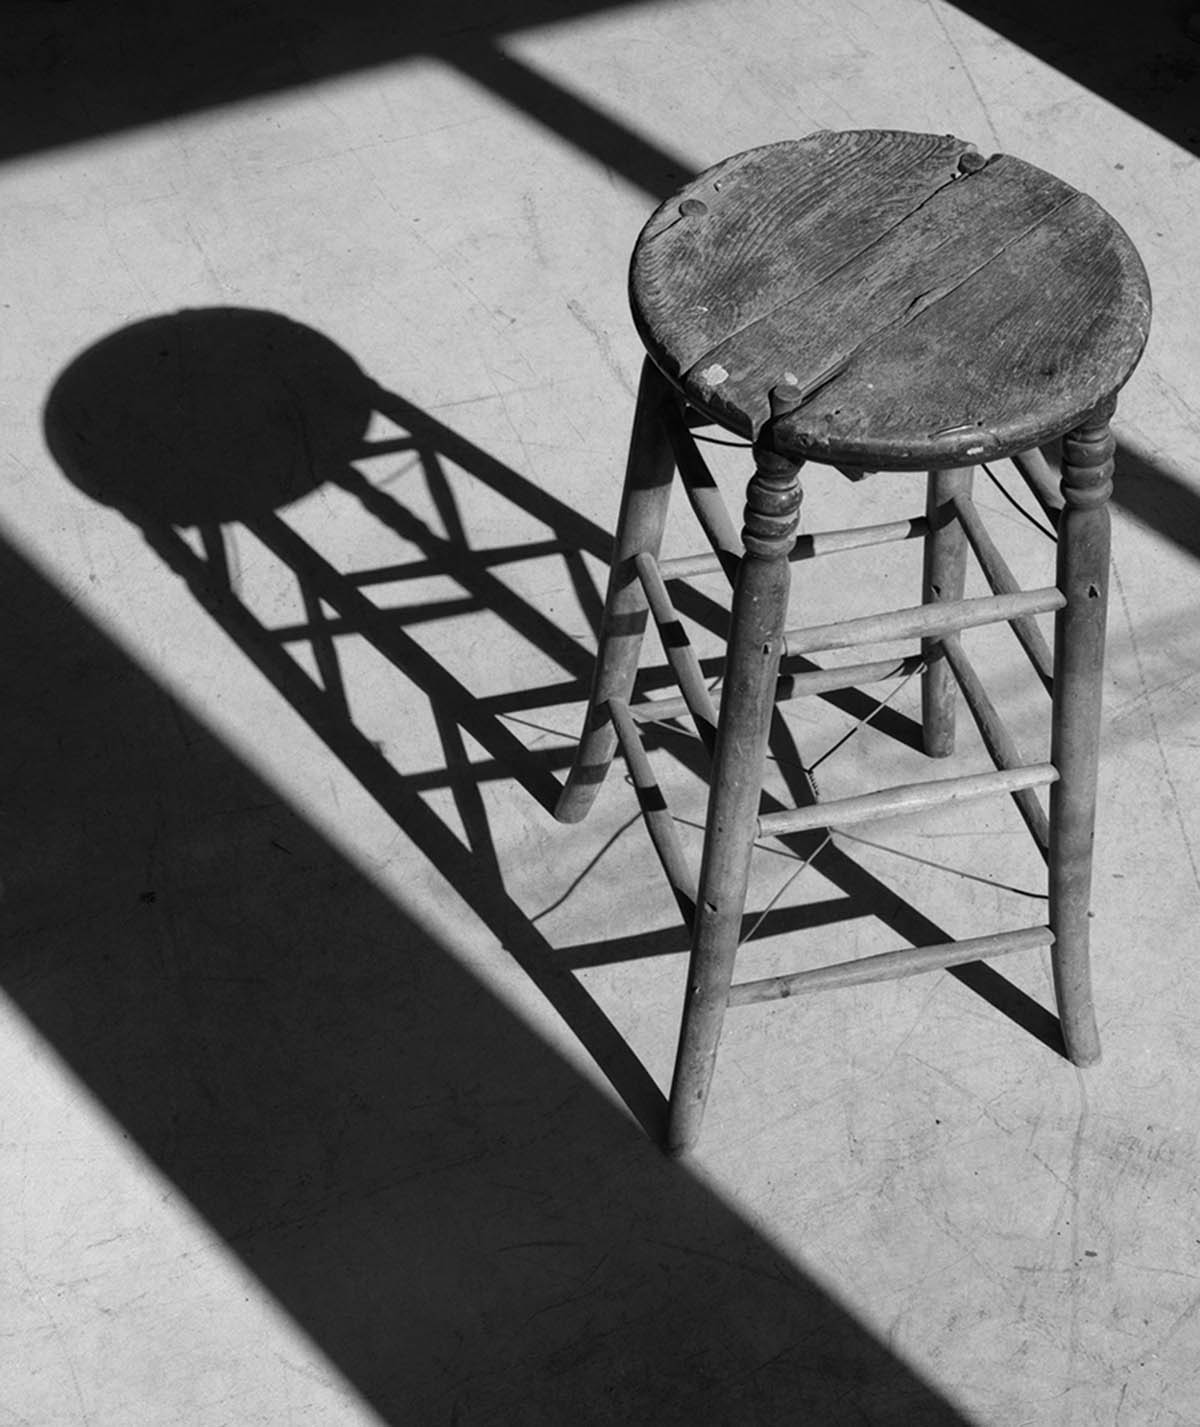 Black and white photograph of an old wooden stool and the shadow it casts on the floor.